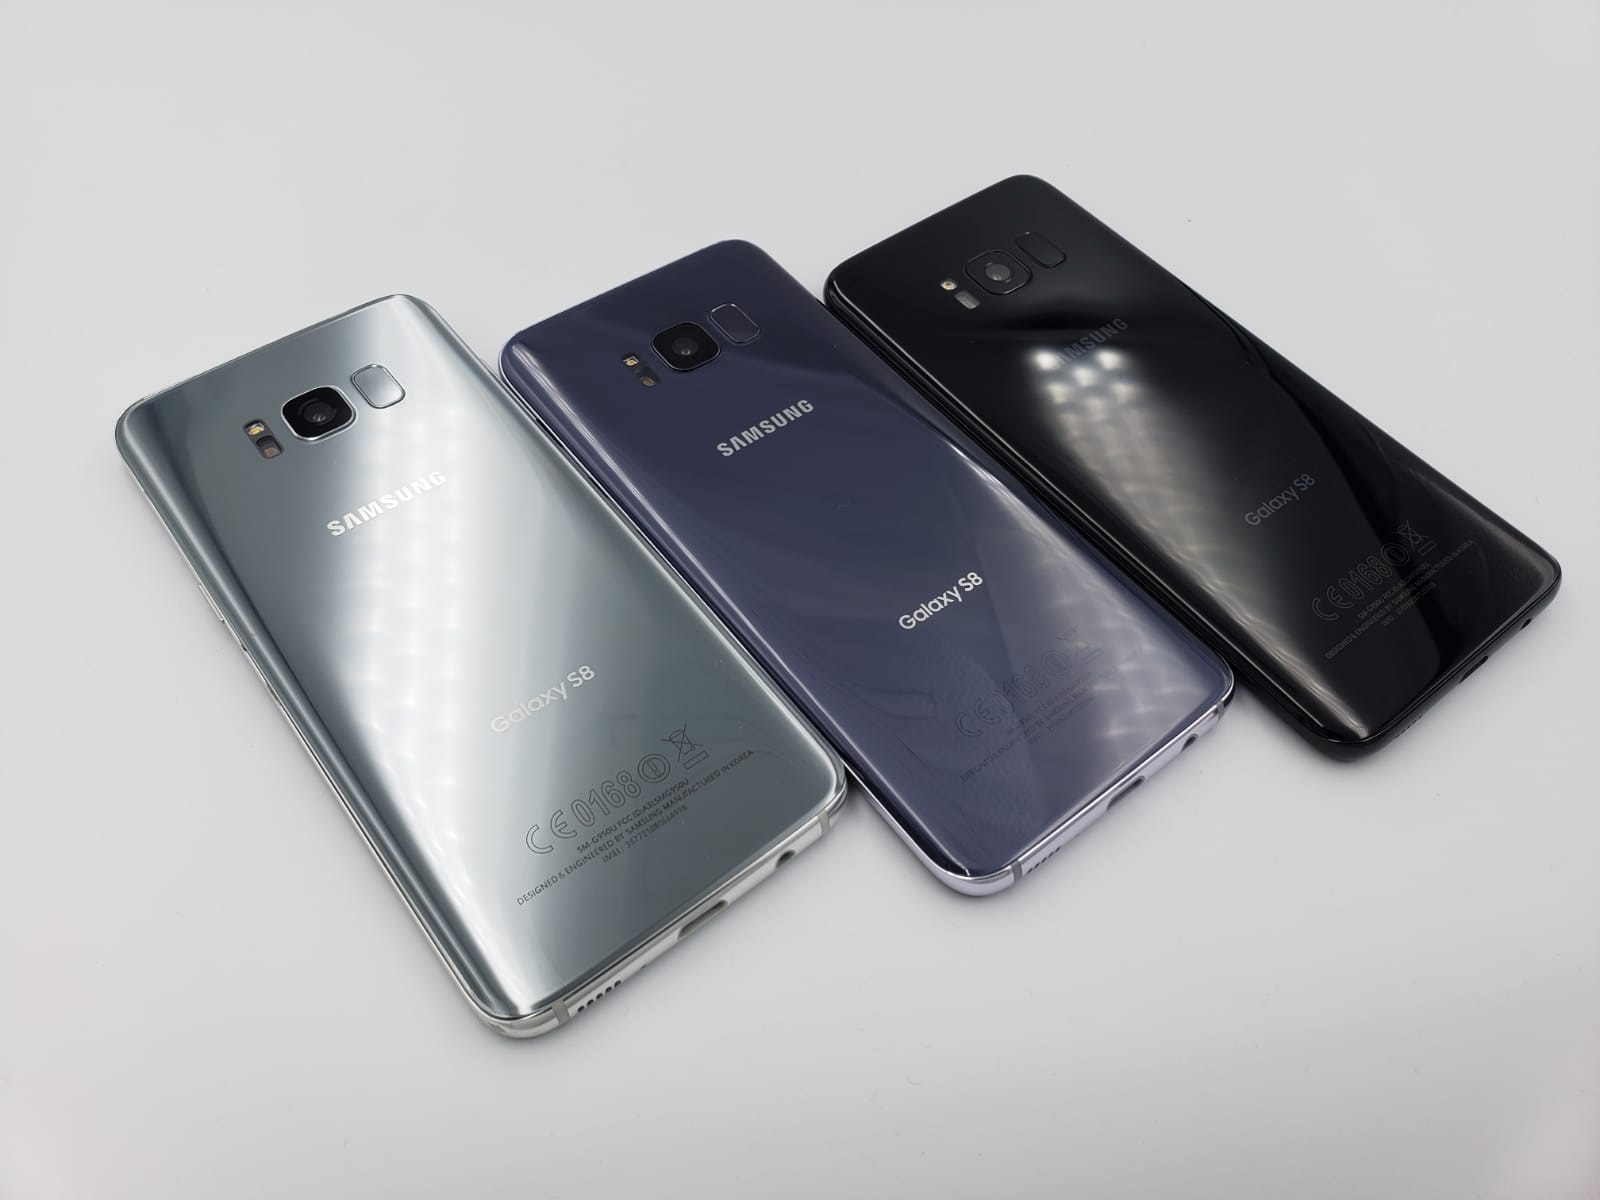 Available Now: Galaxy S8 / S8+ / Note 8